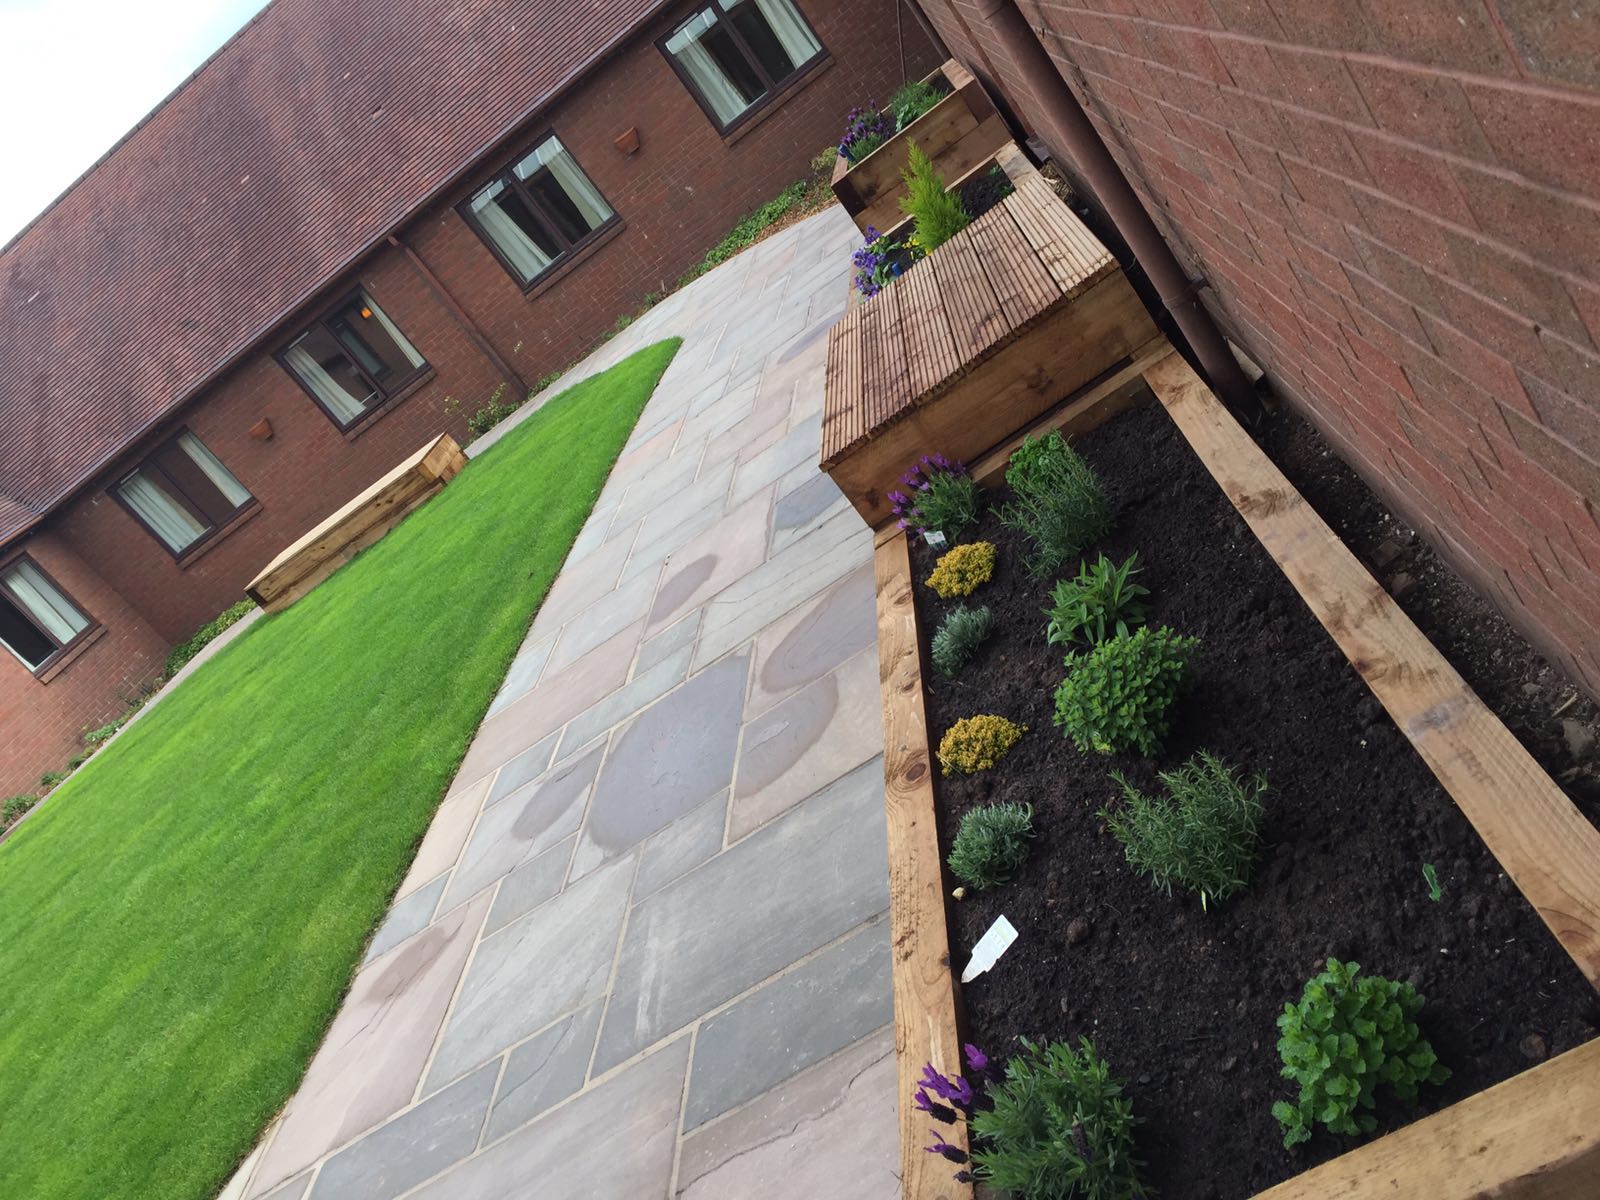 Grace Court Enclosed Garden: Key Healthcare is dedicated to caring for elderly residents in safe. We have multiple dementia care homes including our care home middlesbrough, our care home St. Helen and care home saltburn. We excel in monitoring and improving care levels.